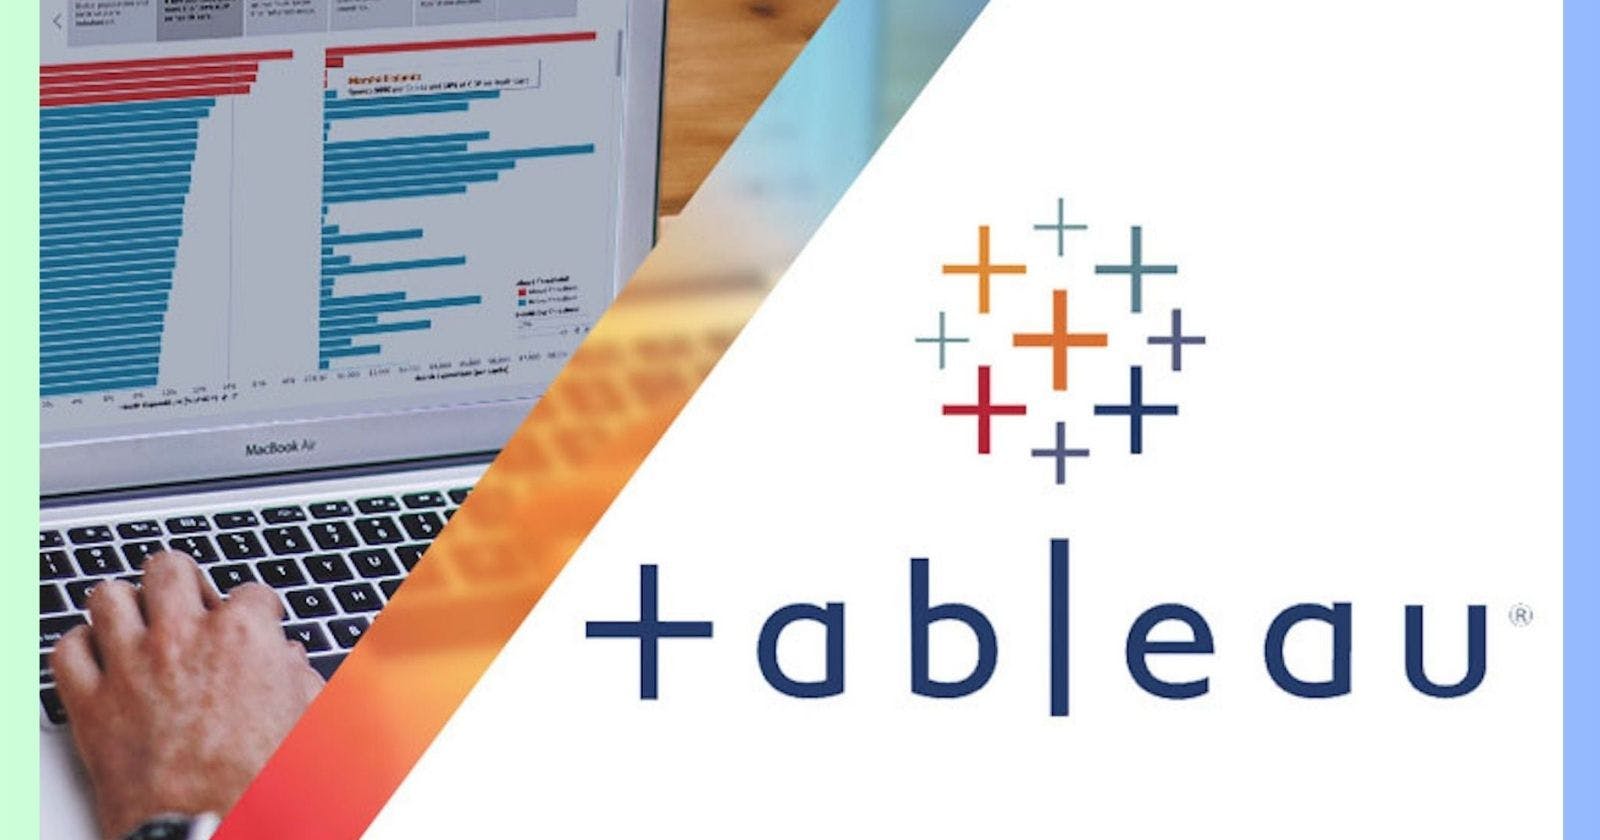 Tableau courses can help propel your career: Here’s how